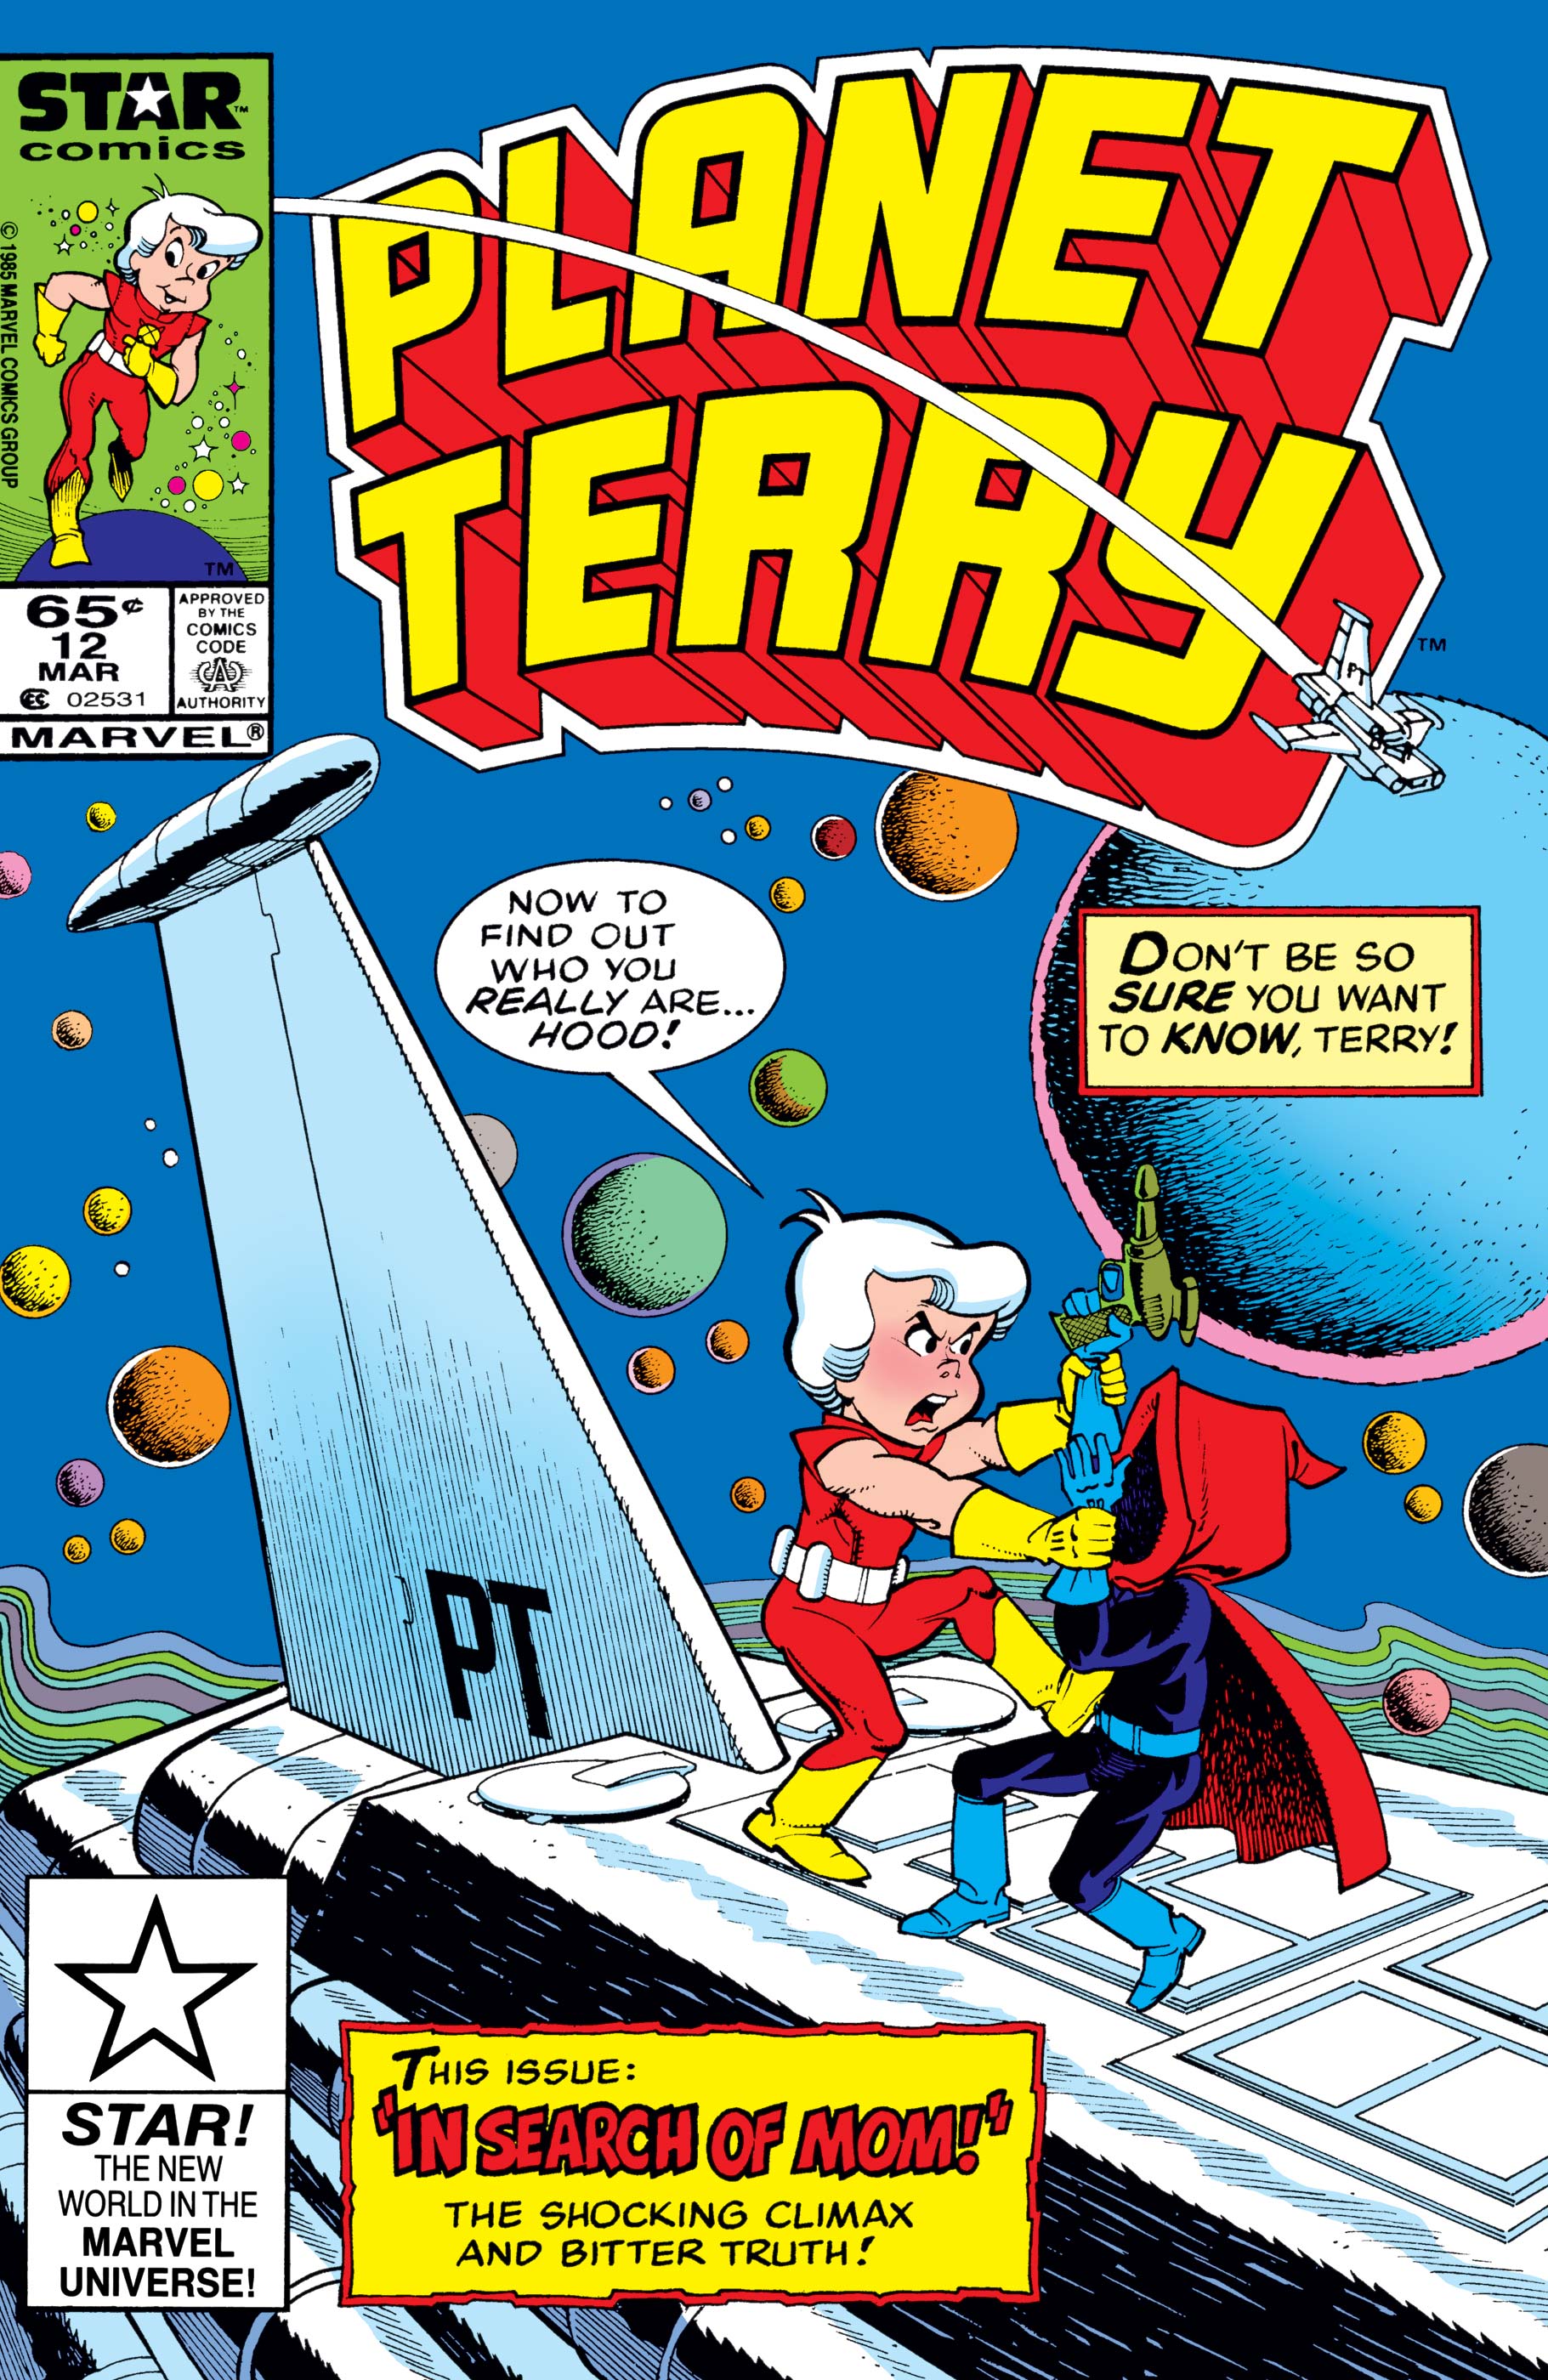 Planet Terry (1985) #12